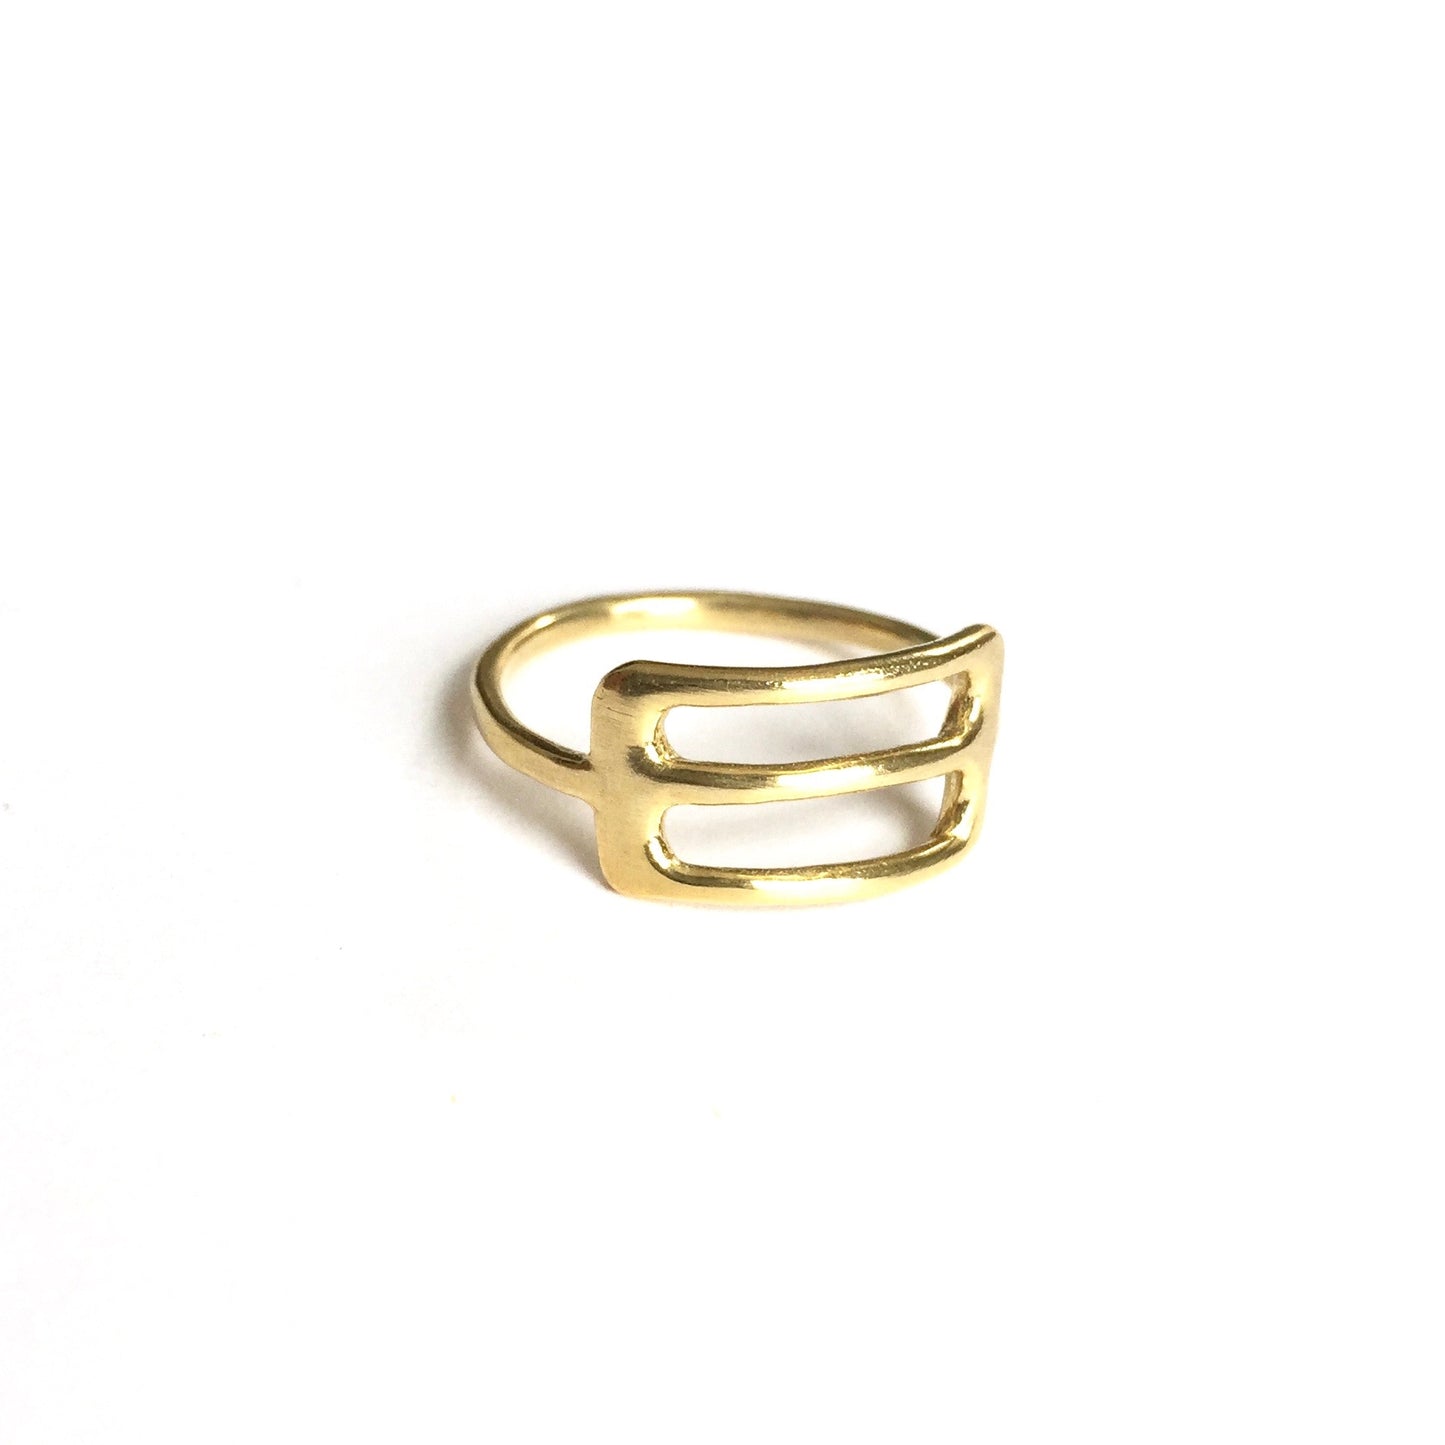 Handmade Column Ring. This ring has been lovingly hand carved in wax, then cast in metal using the lost wax casting process. Made in gold vermeil (14k heavy gold plate over sterling silver.